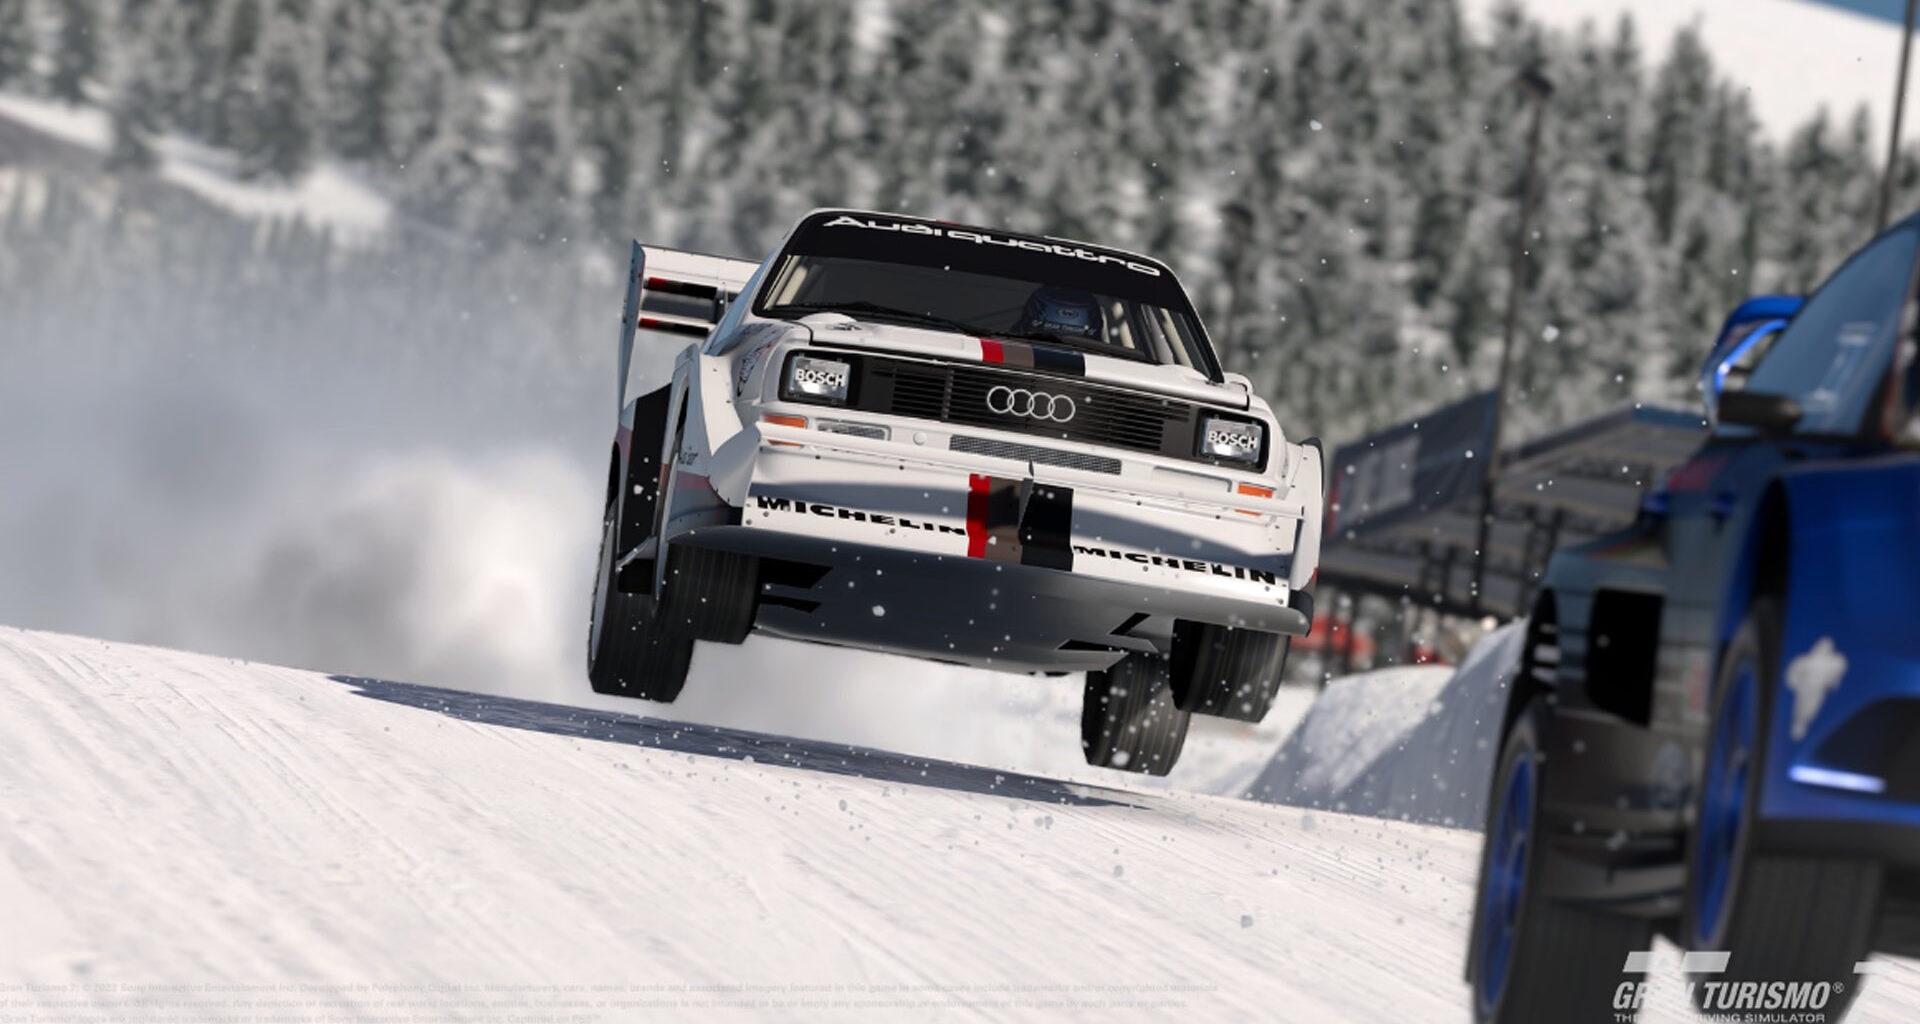 Gran Turismo 7 Spec II includes Sophy 2.0 AI, 50 new licence tests and snow track